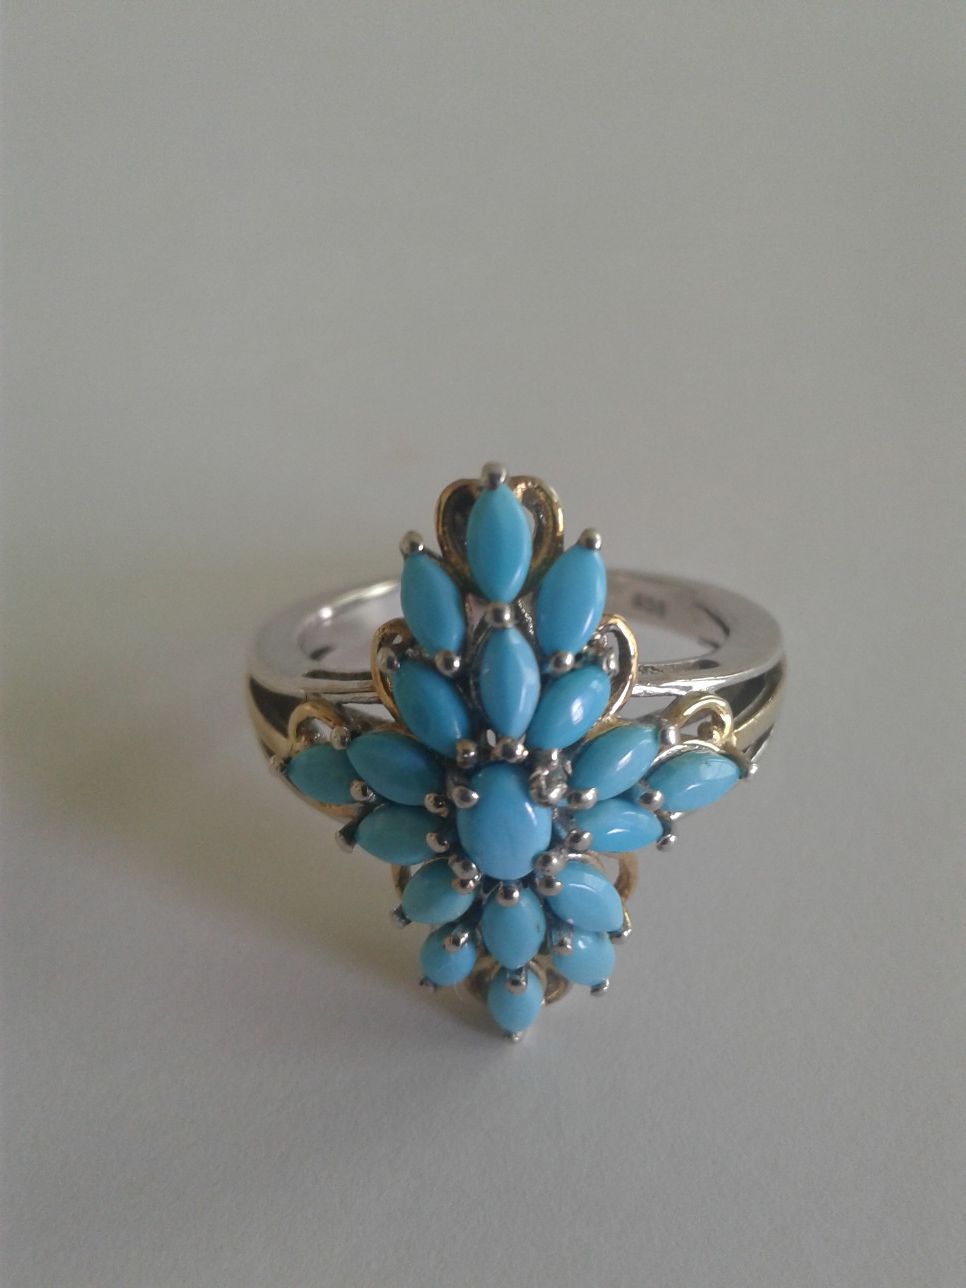 Sleeping Beauty Turquoise Ring, 14k and Platinum over Sterling, Size 8